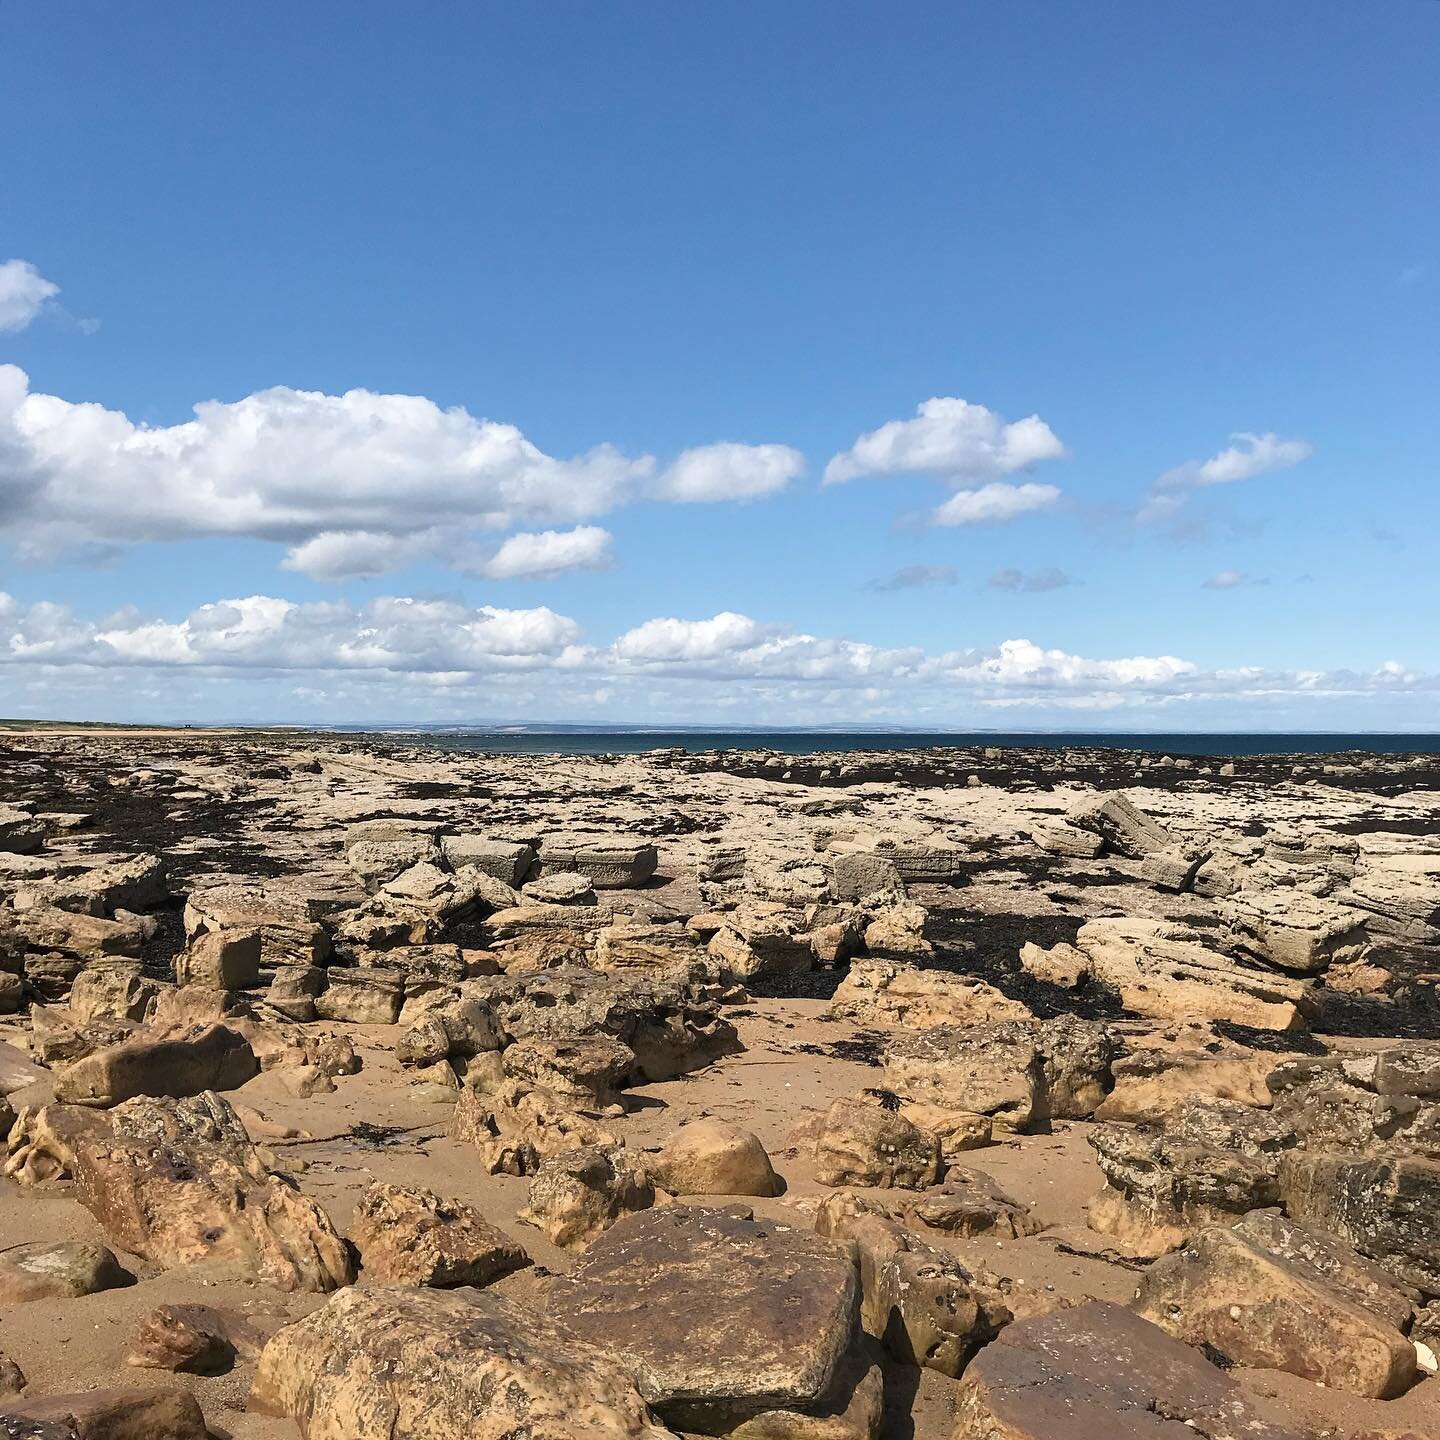 Kingsbarns beach, Fife.
Rocky outcrops and Carboniferous fossils. 
Textural landscape inspiration. 
#inspiration #landscape #fifecoast #inspiredbynature #texture #imprints #kingsbarns #fossils #scottishjewellery